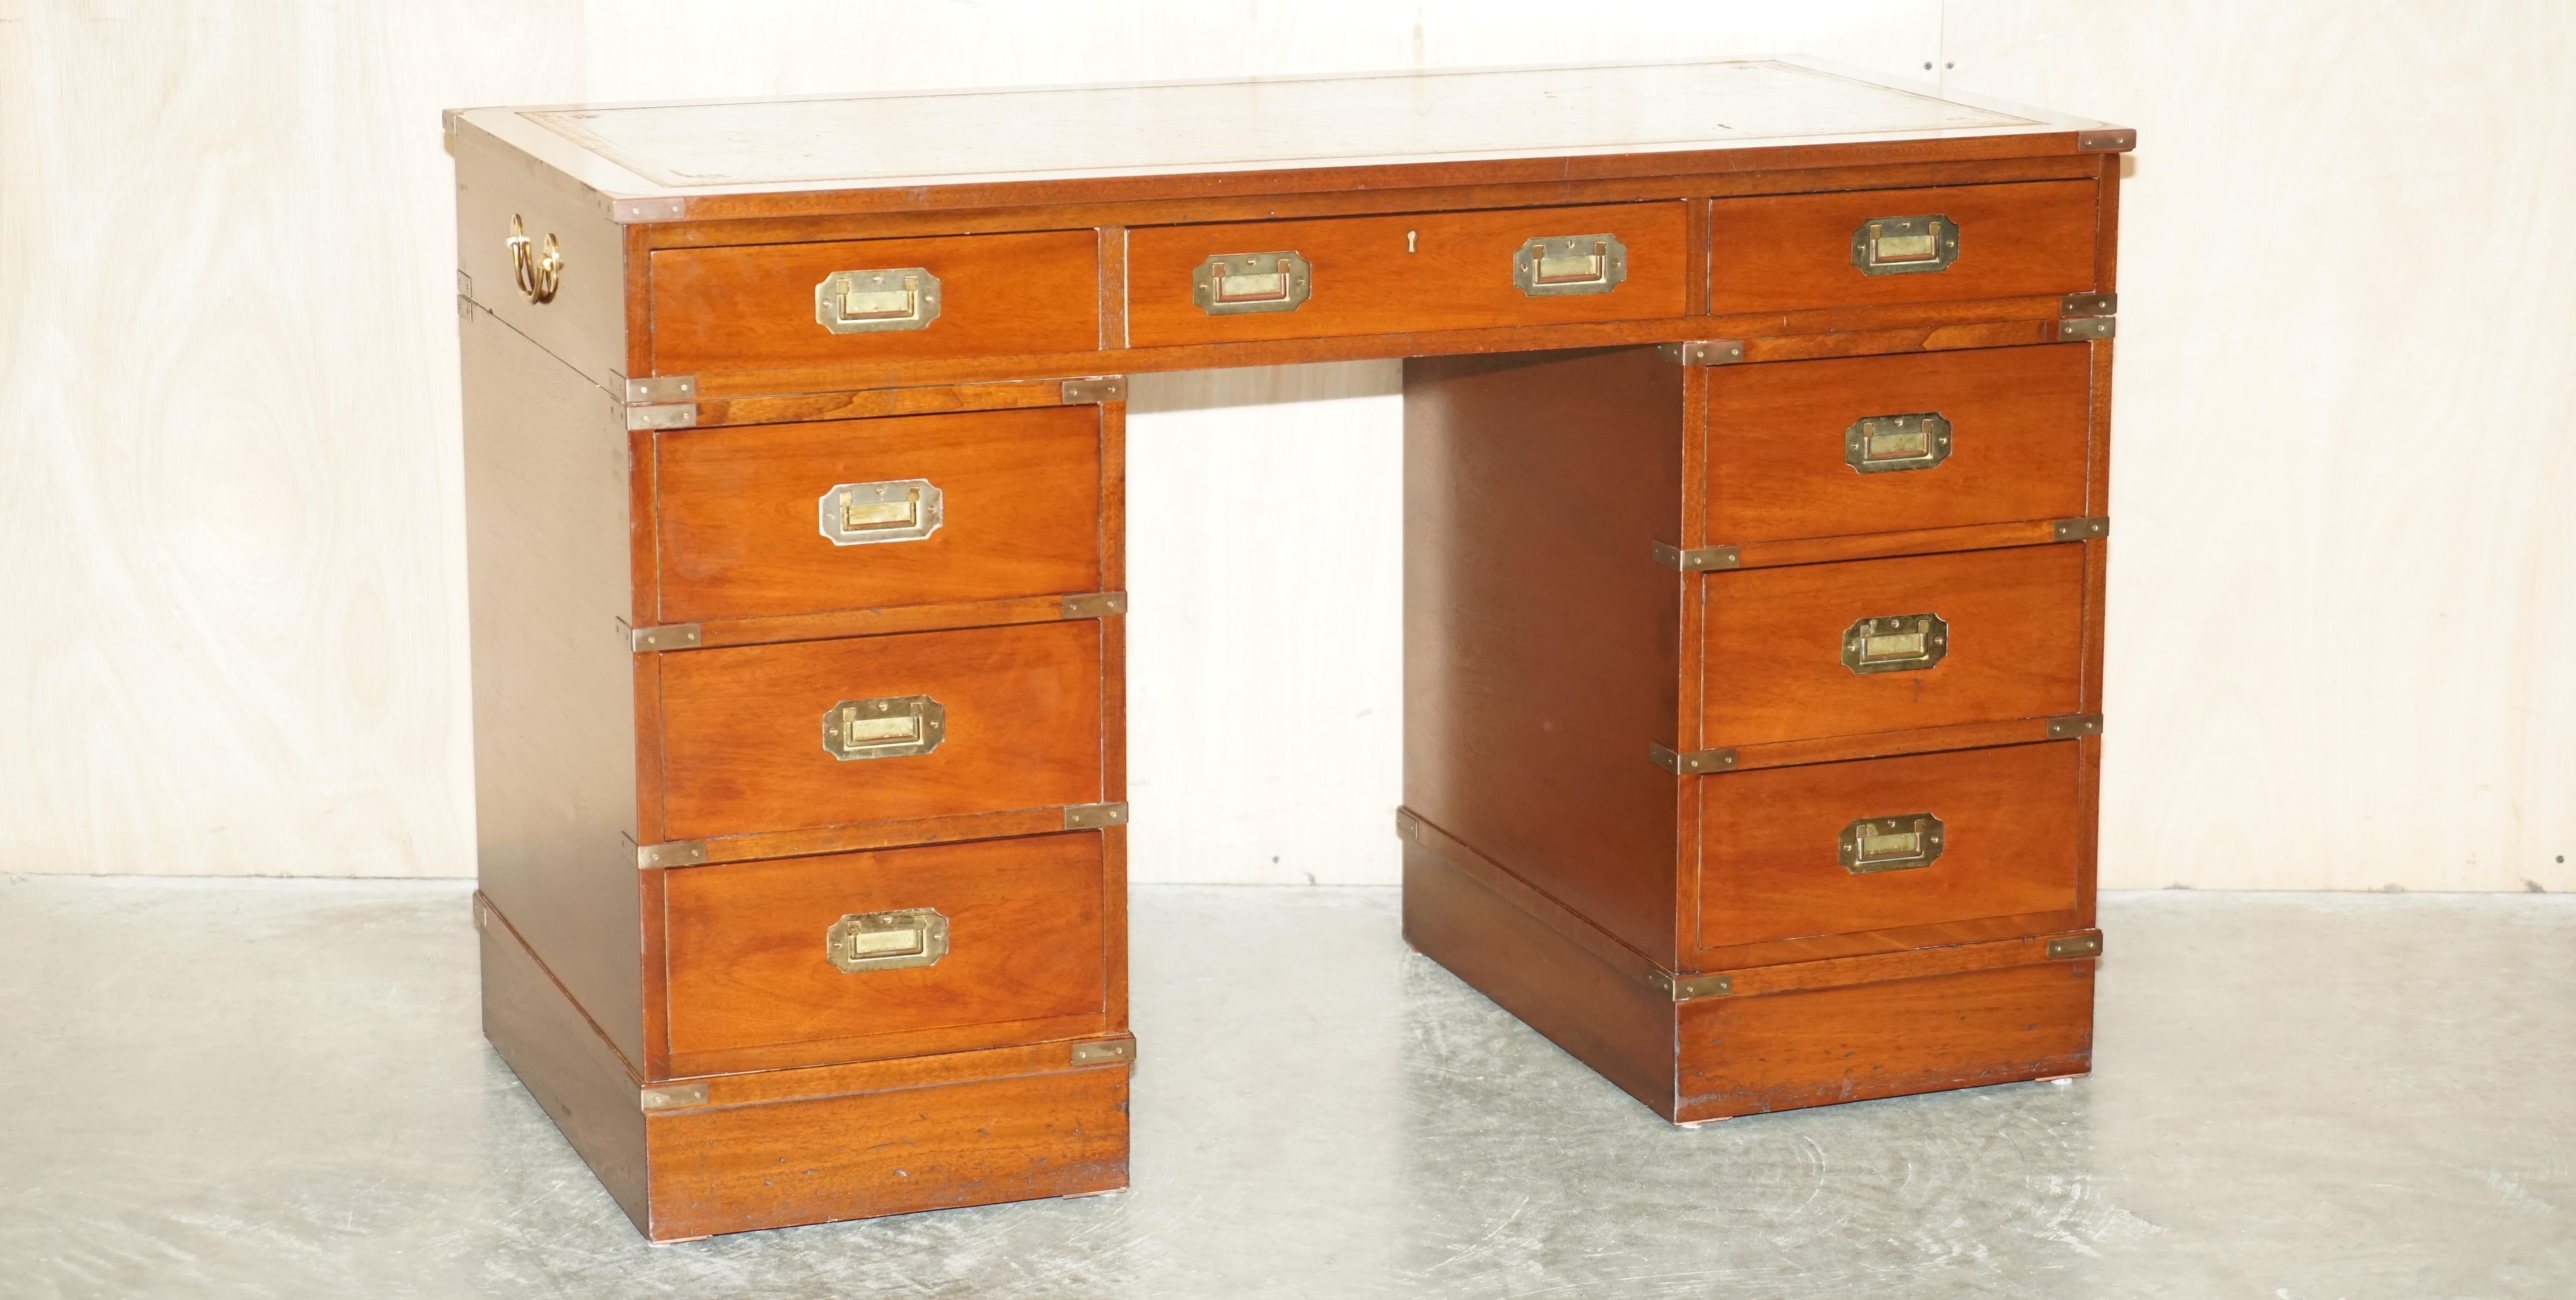 We are delighted to offer for sale this lovely vintage, Harrods London retailed, REH Kennedy made, Military Campaign twin pedestal partners desk with brown leather writing surface

This is a wonderful find, quite rare in the sense that its all